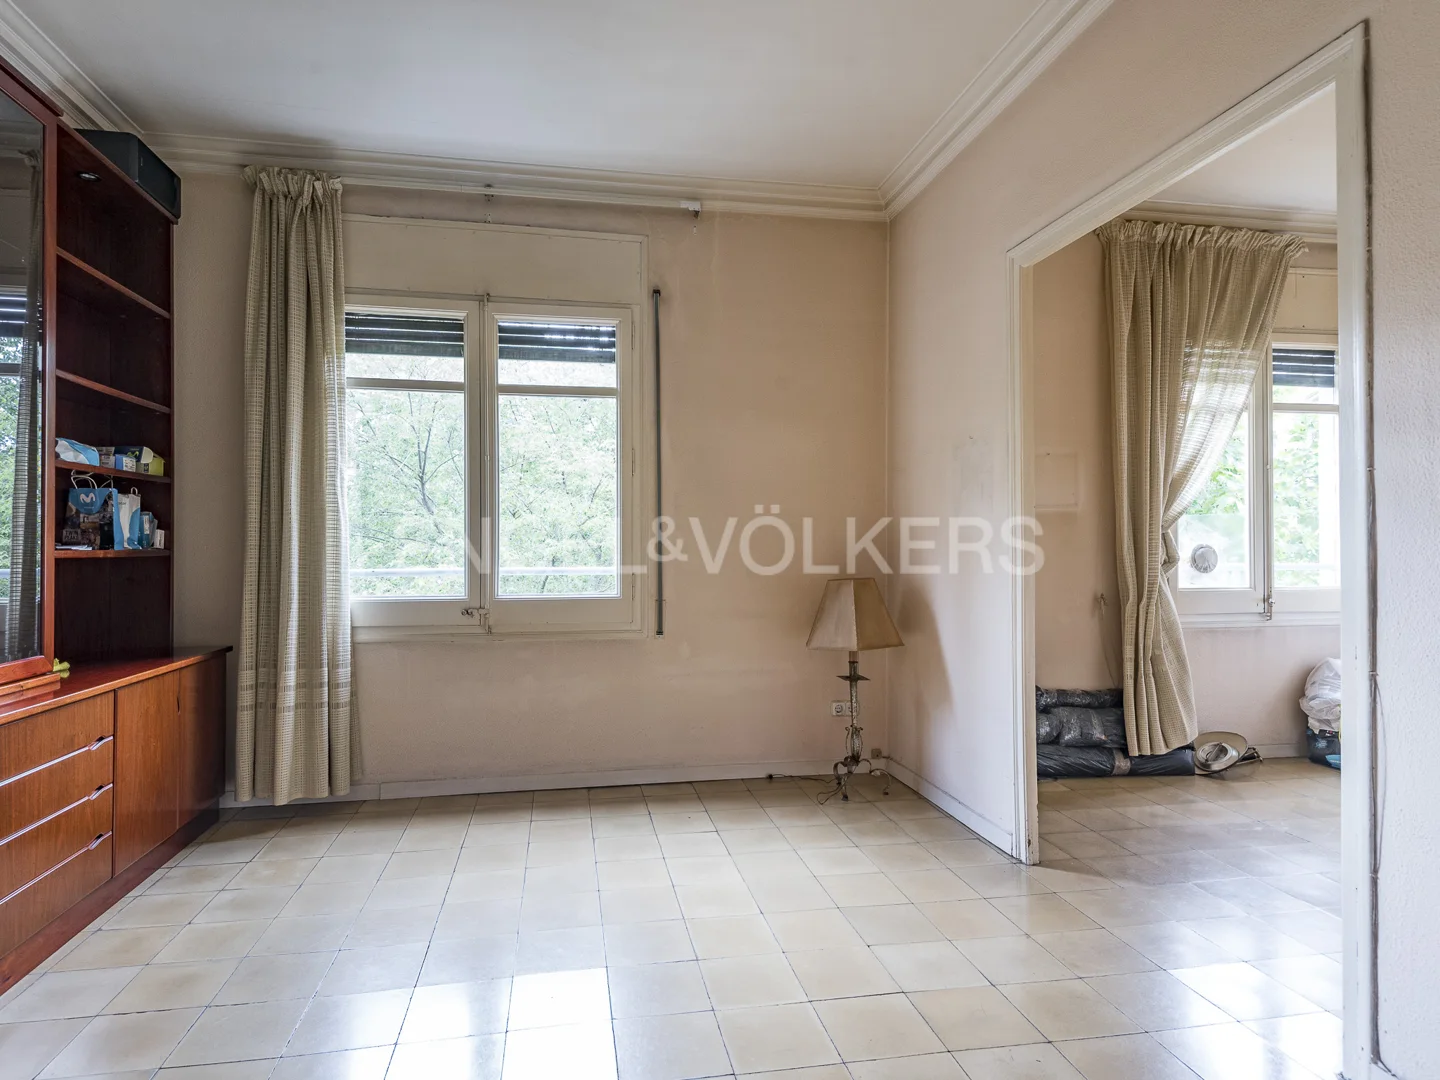 Cozy property with possibilities of renovation in Eixample Dret